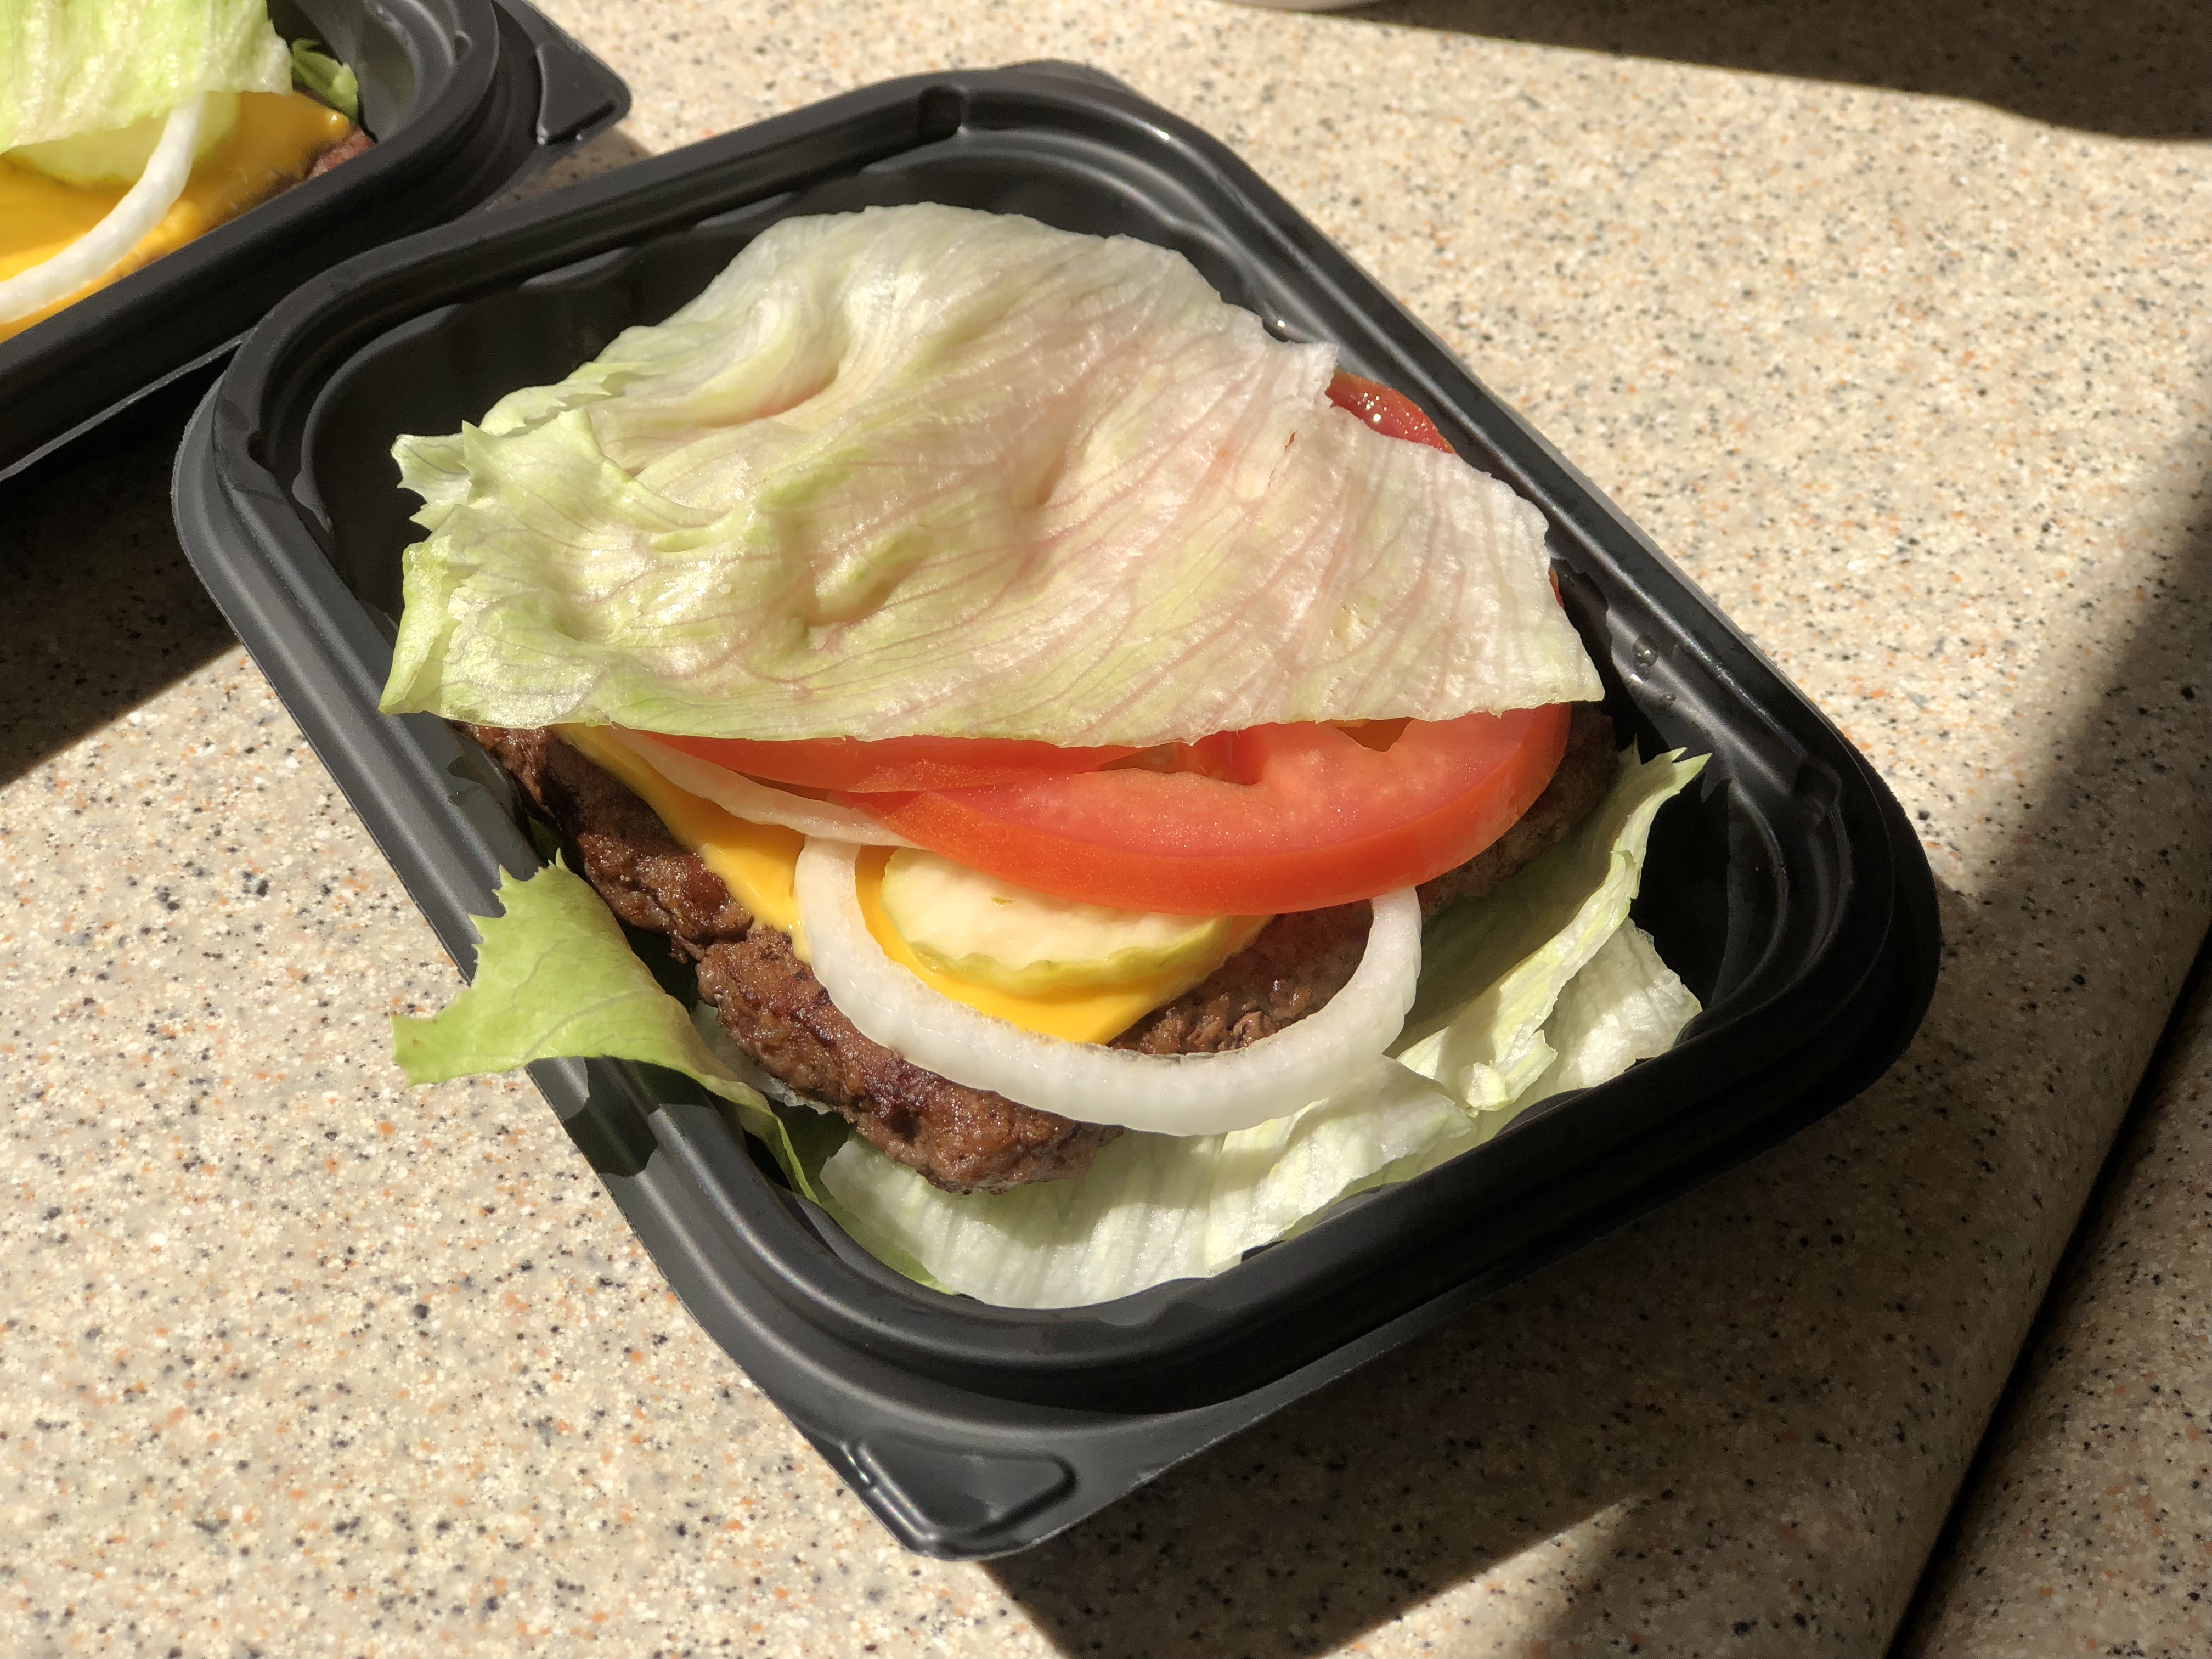 Wendy's burgers are great for keto. Get a free cheeseburger every day in September